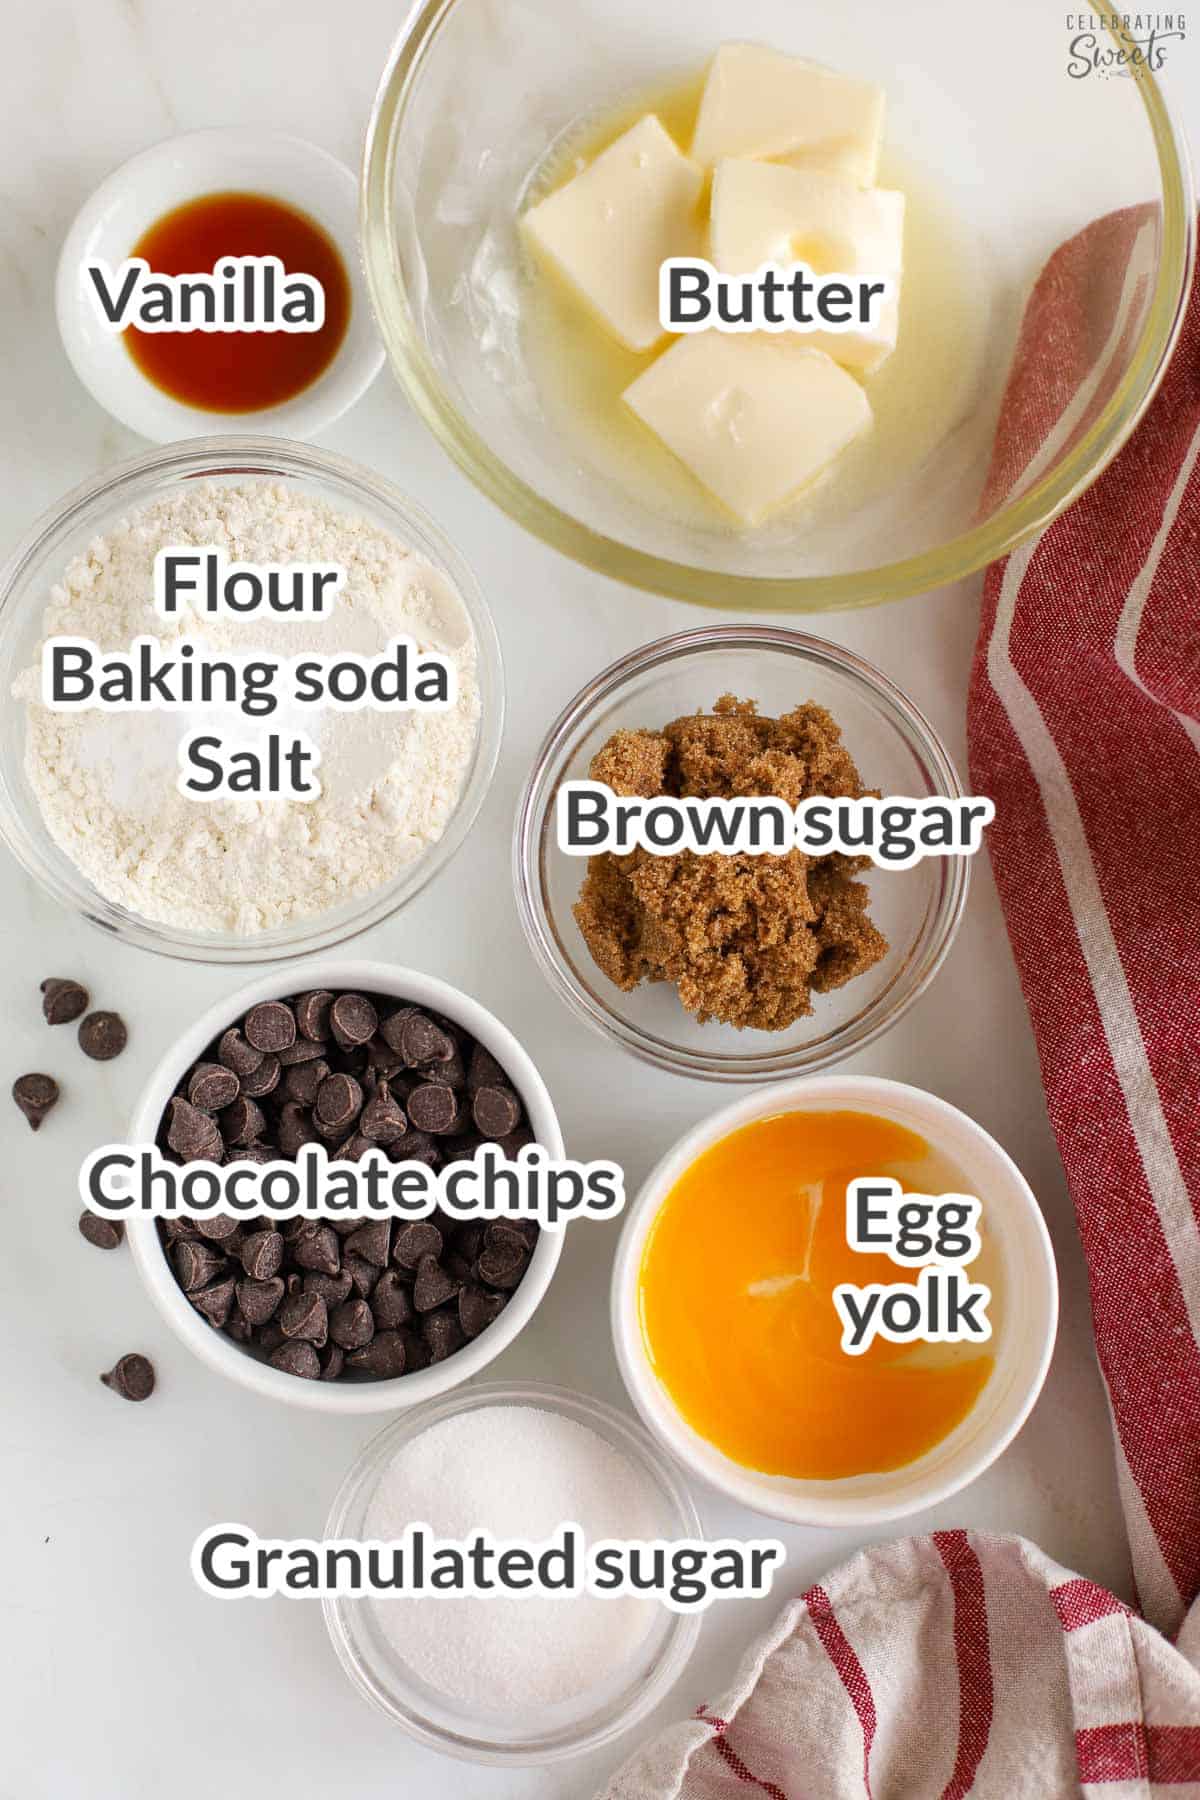 Ingredients to make a small batch of chocolate chip cookies (sugars, egg yolk, flour, chocolate chips, baking soda, salt, butter, vanilla).